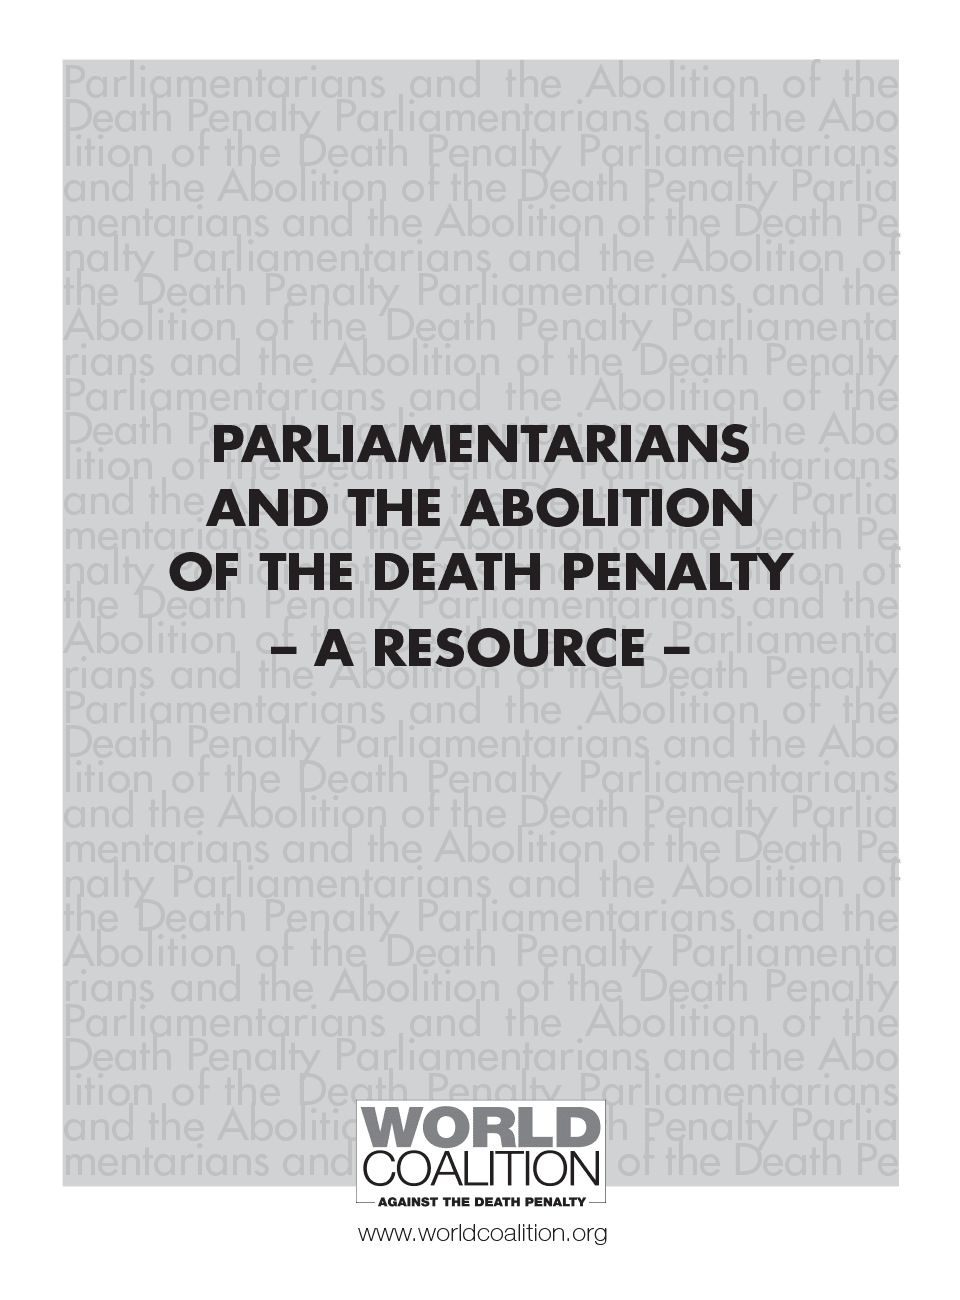 Parliamentary Guidebook on the Abolition of the Death Penalty